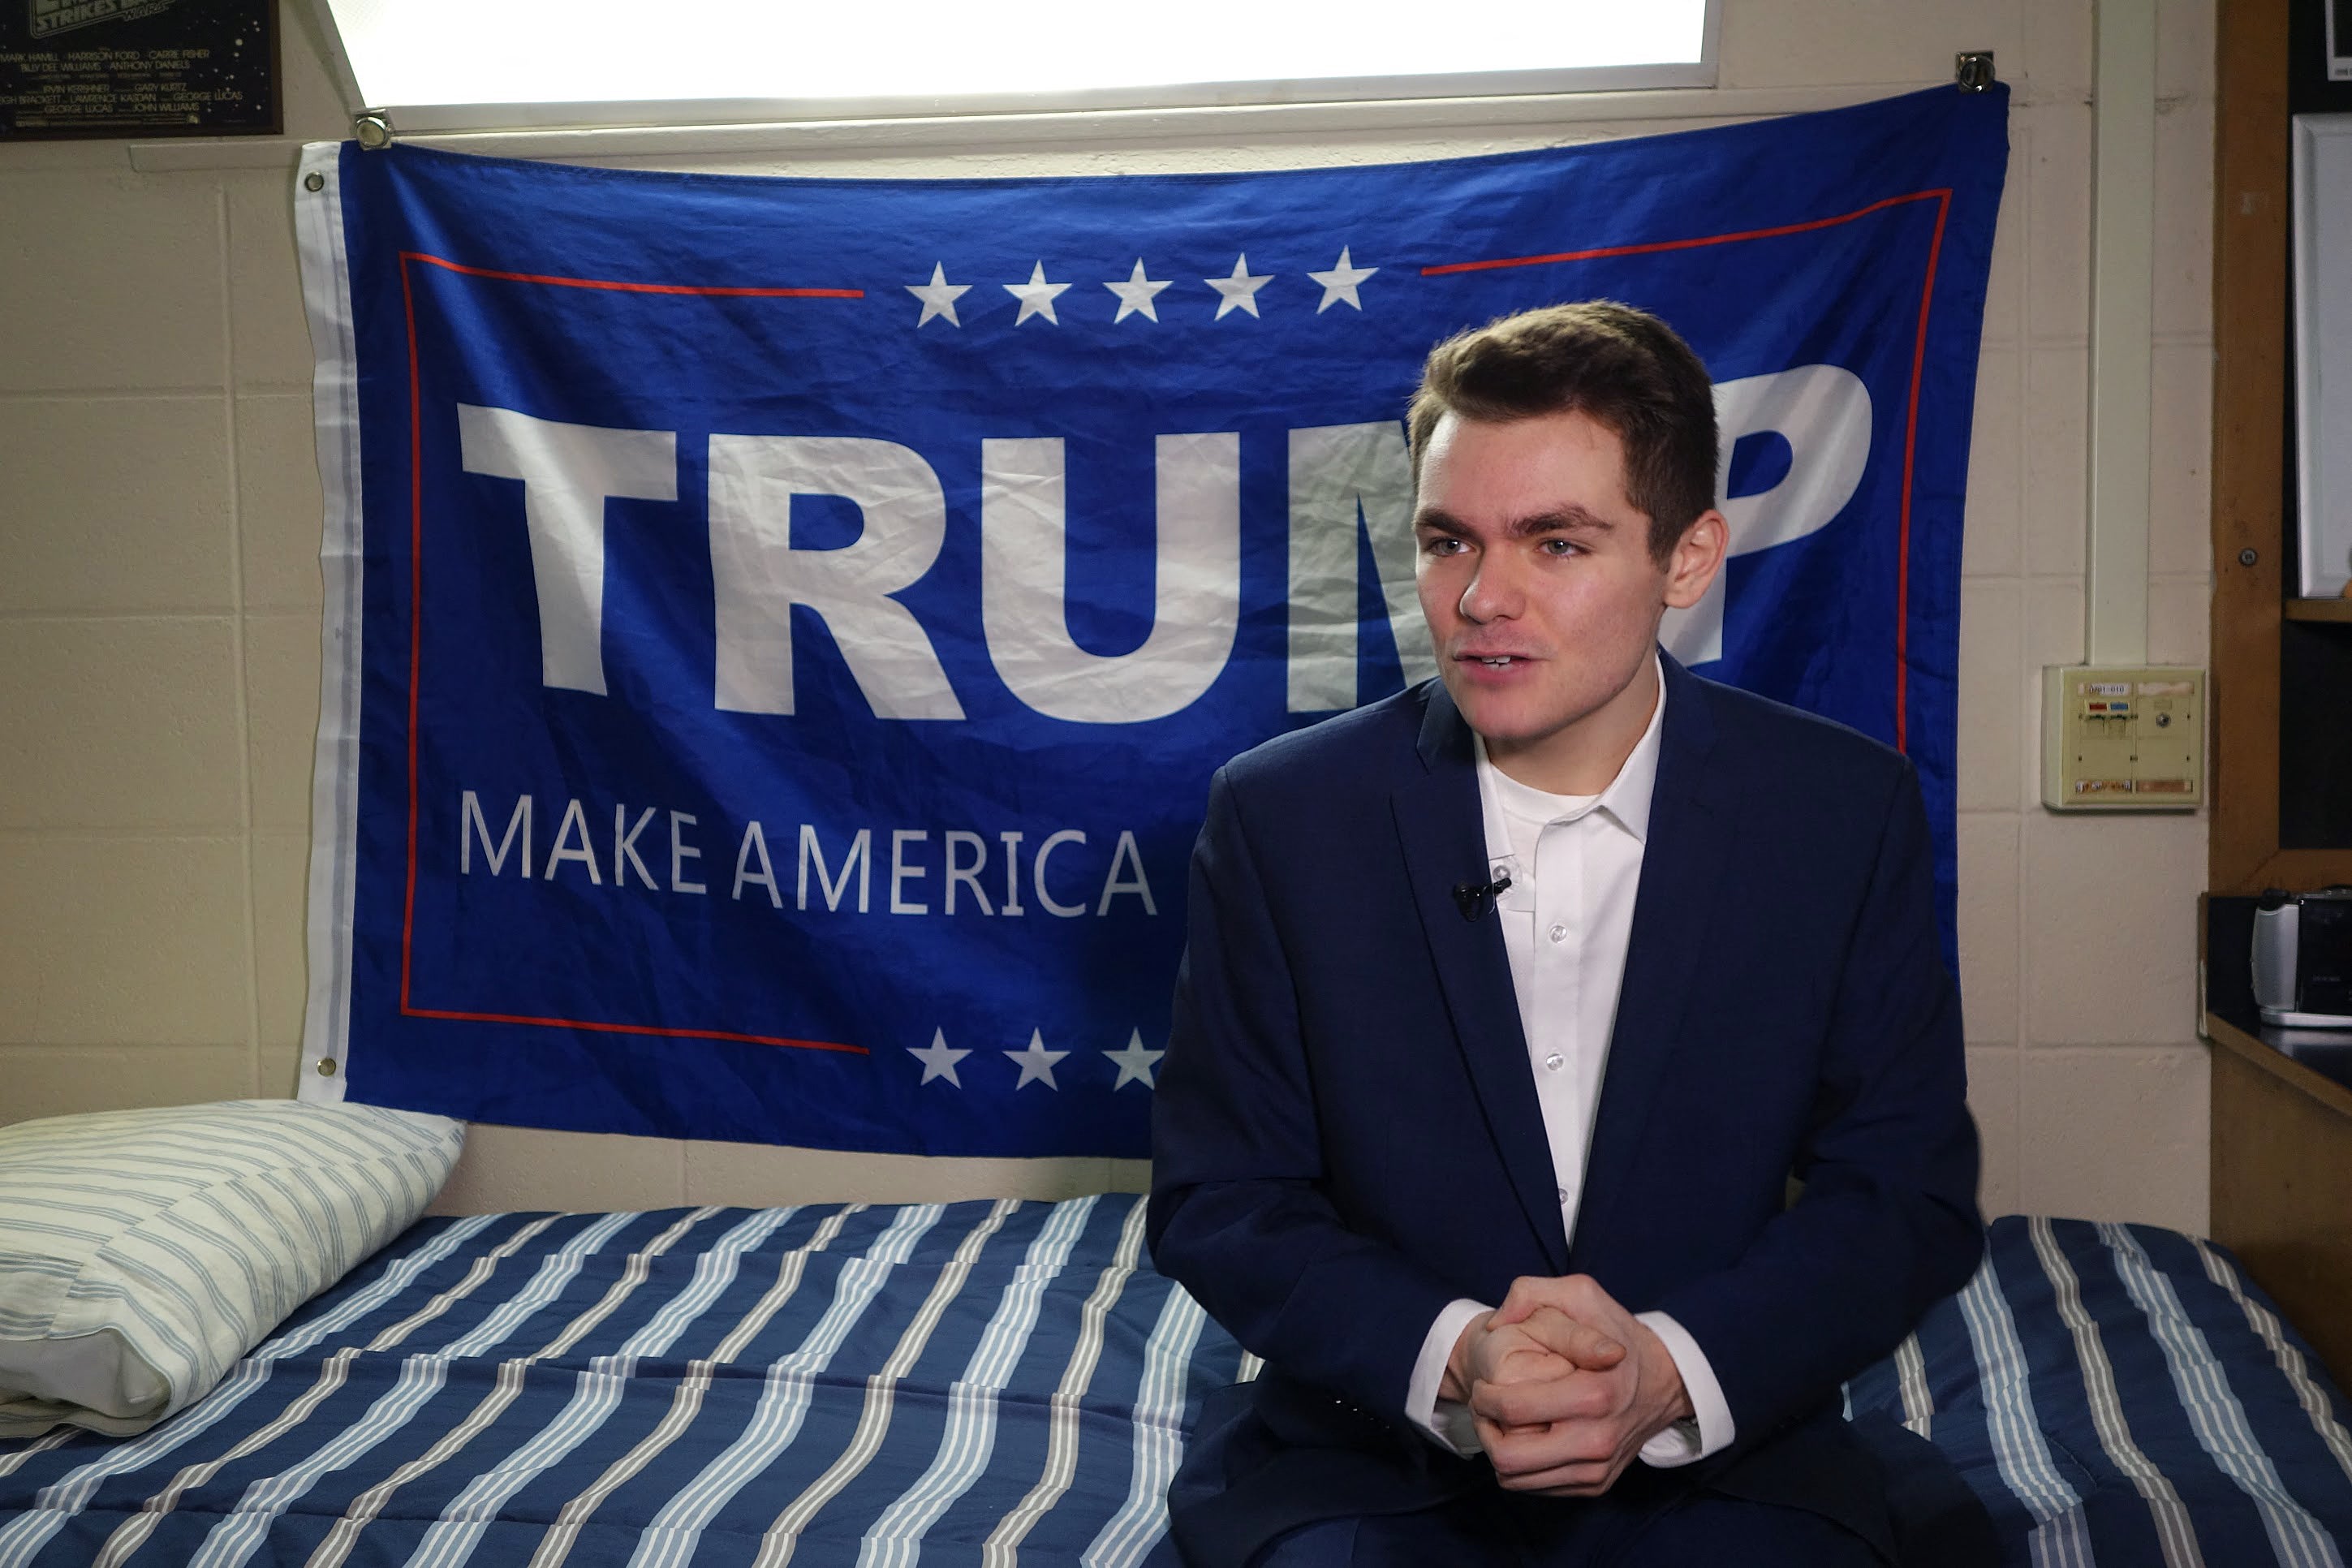 Nick Fuentes was for several years an enthusiastic supporter of Donald Trump